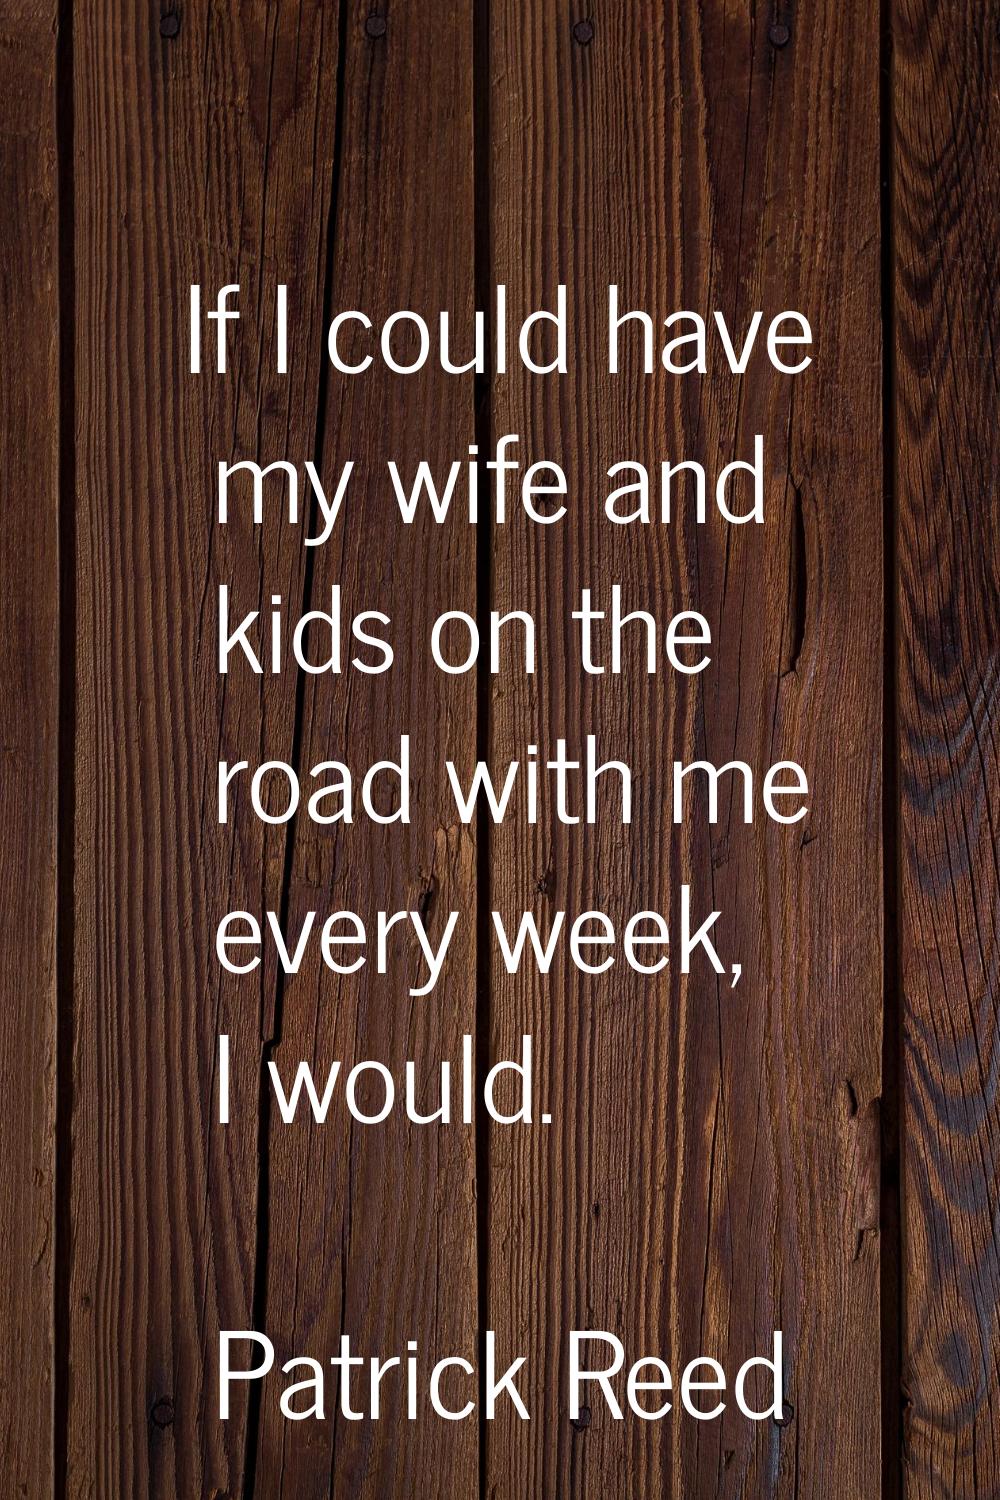 If I could have my wife and kids on the road with me every week, I would.